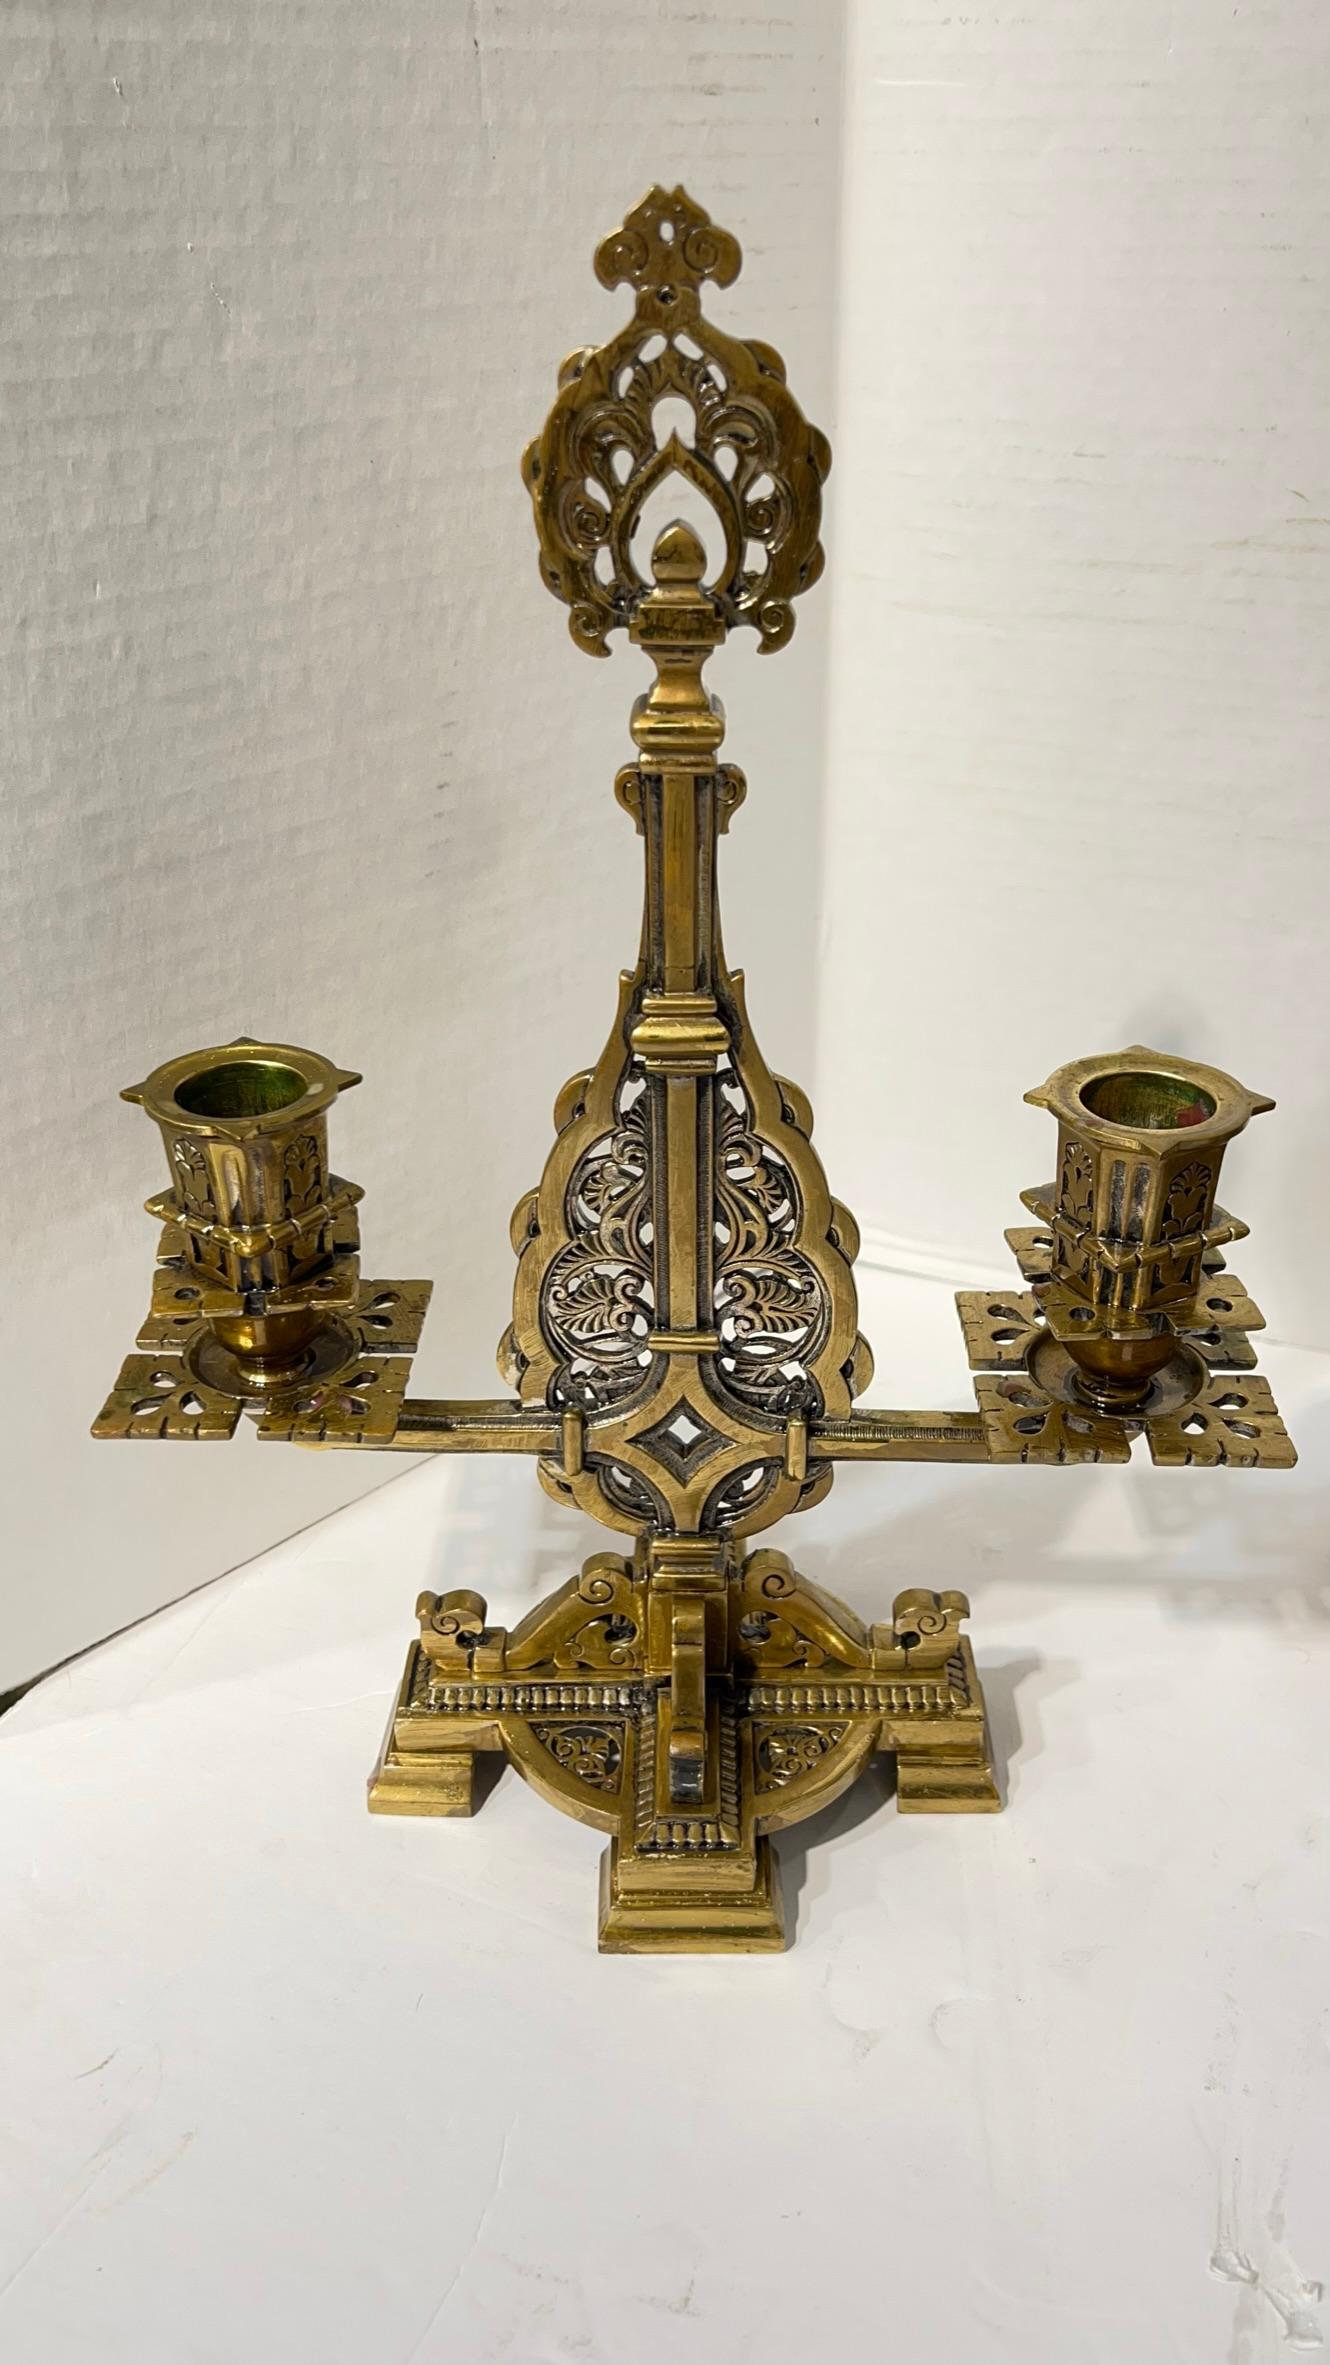 19th Century French Mantel Clock and Candelabra Garniture in Islamic Style For Sale 6